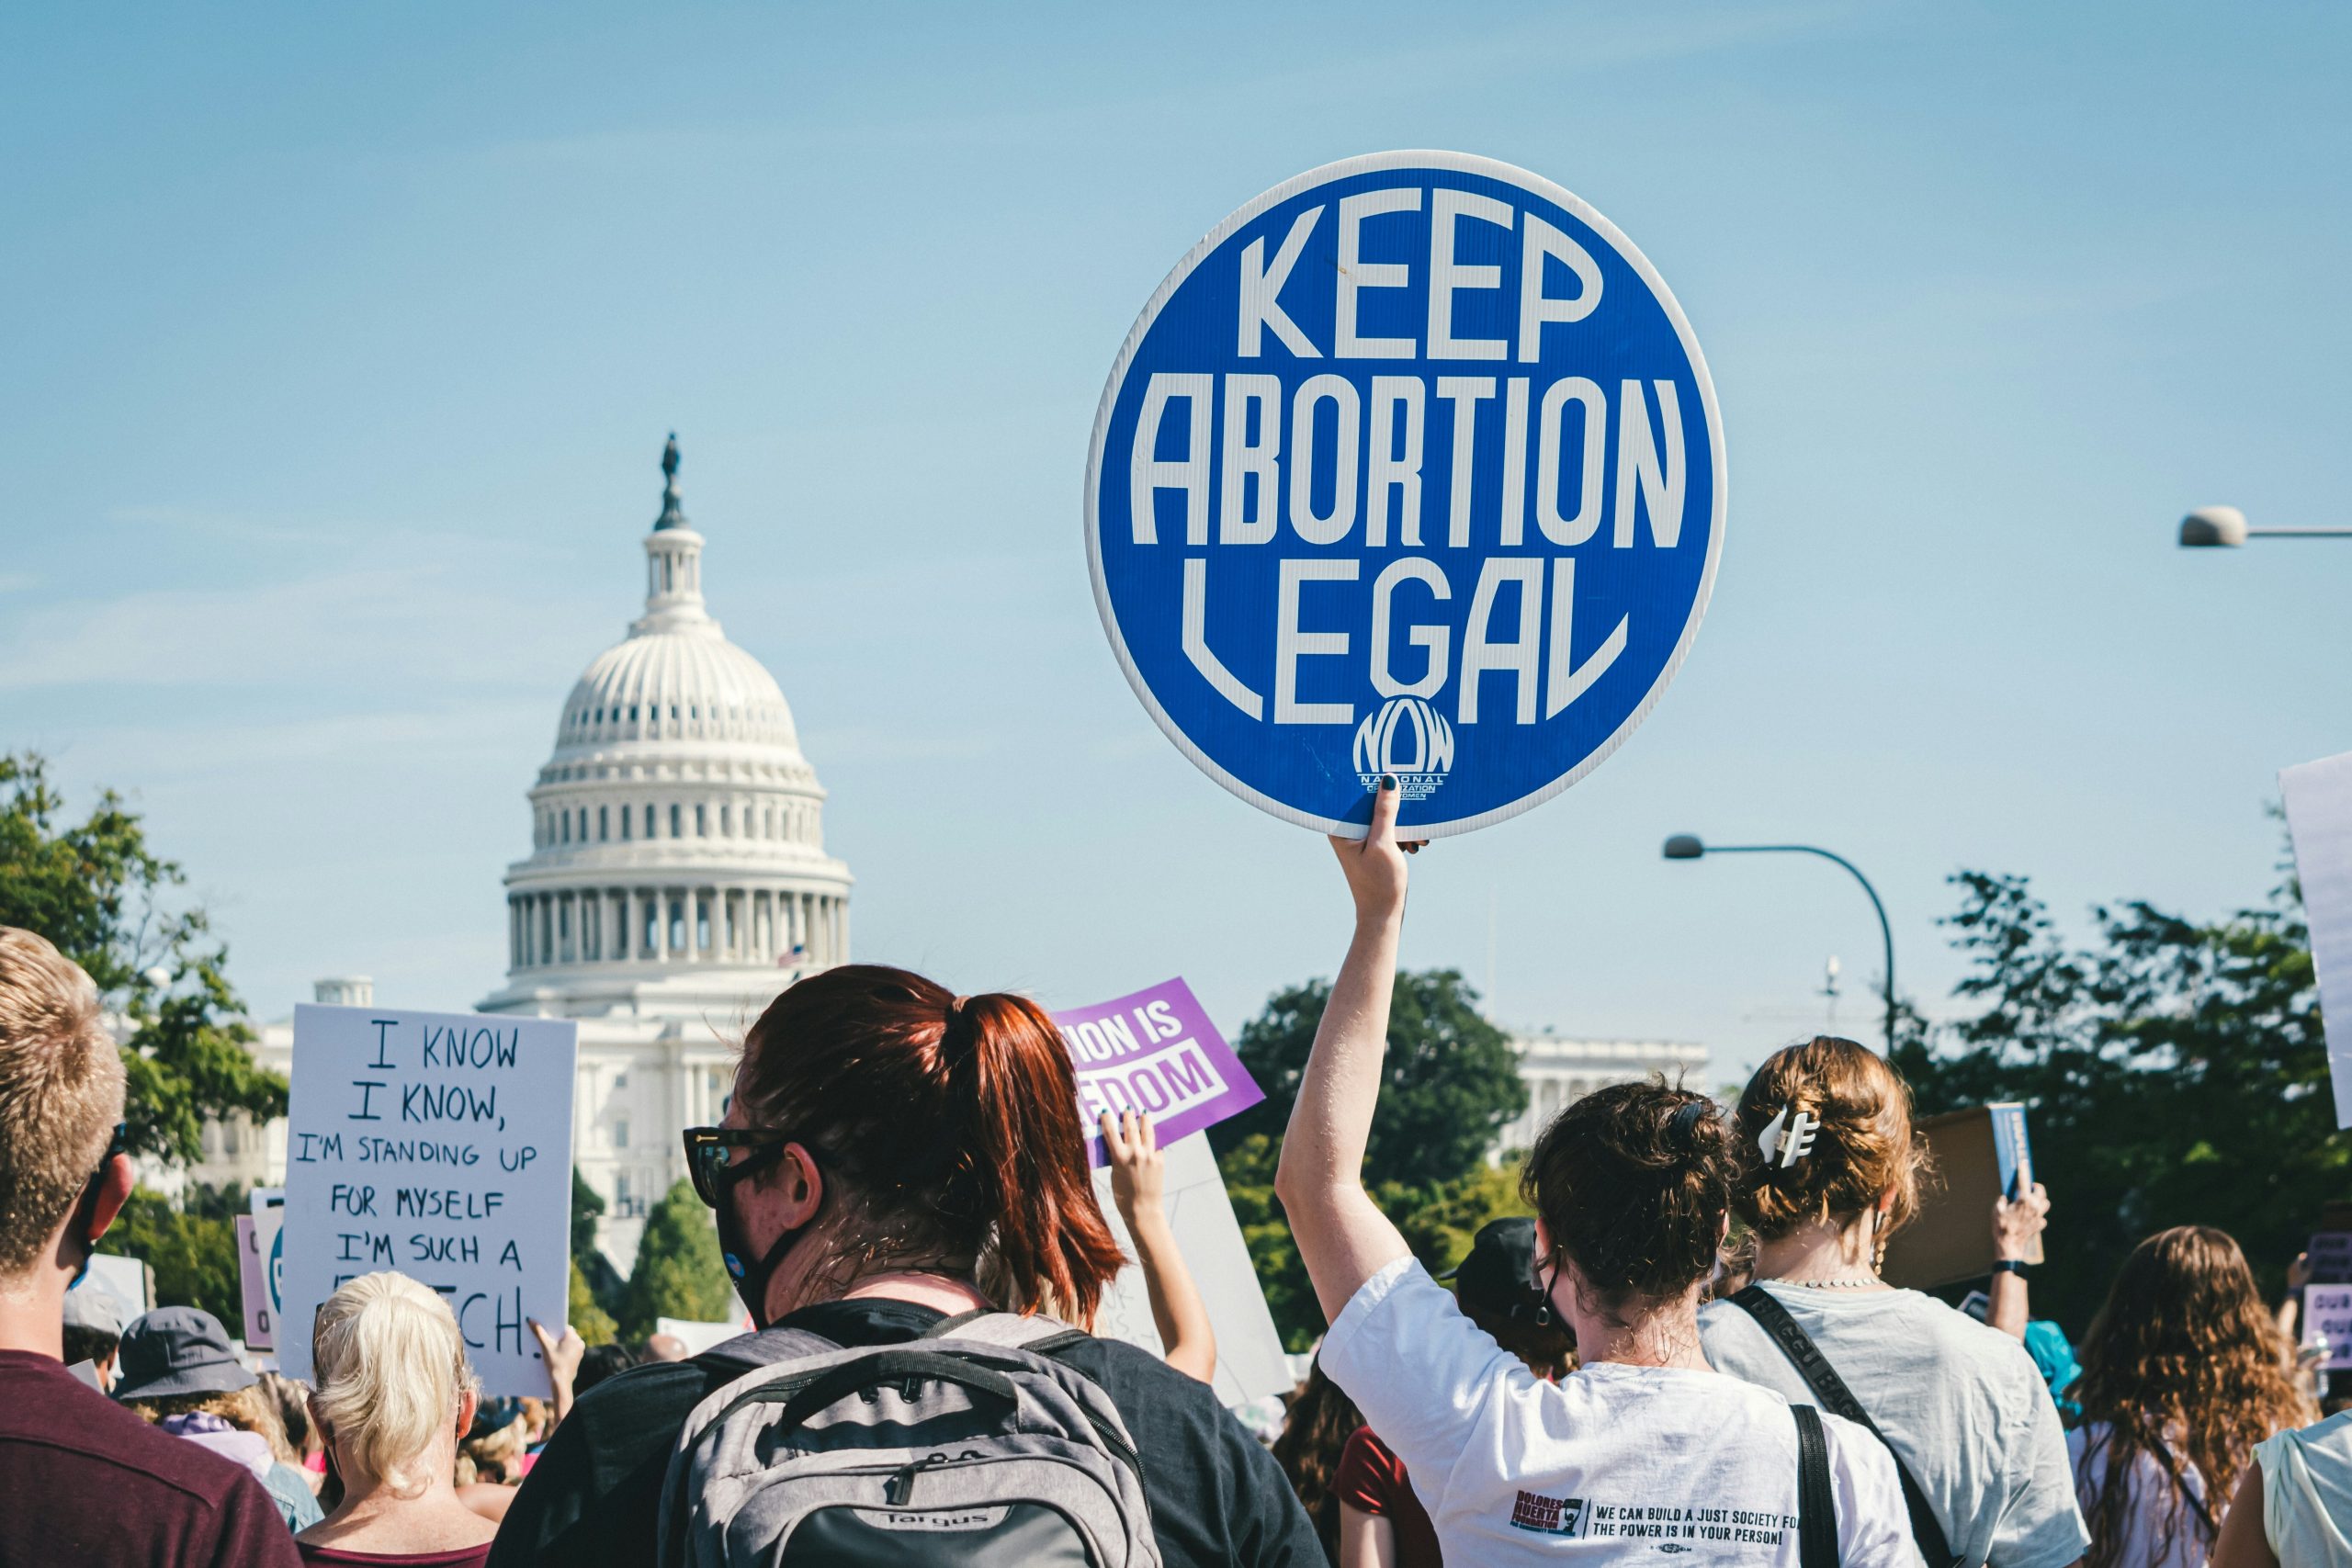 stock photograph of a protest at the US capitol building. A woman holds a blue, round sign that says "Keep Abortion Legal"